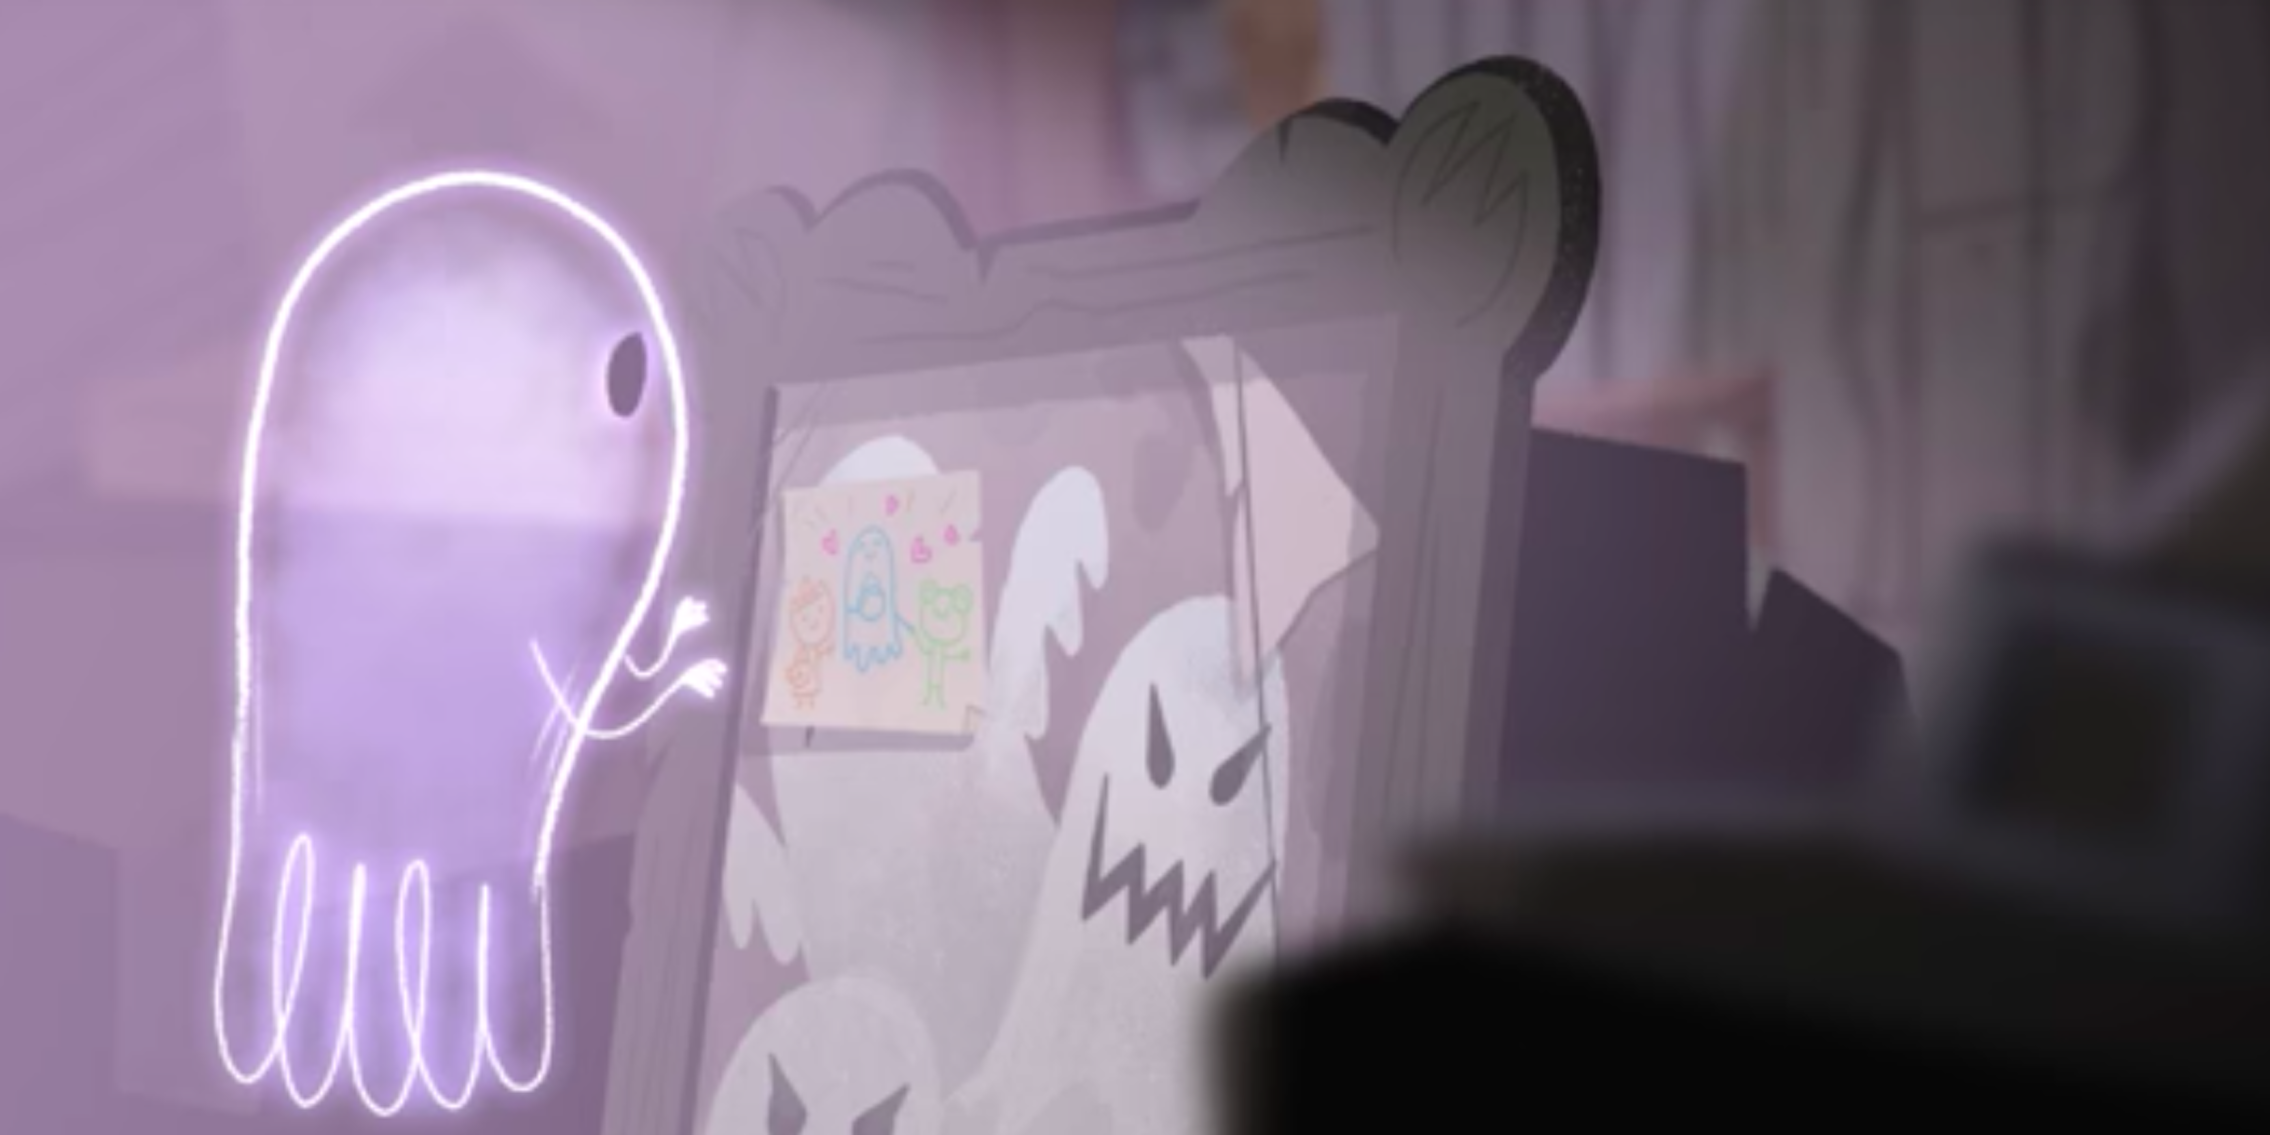 Halloween Google doodle tells the story of Jinx, the lonely ghost